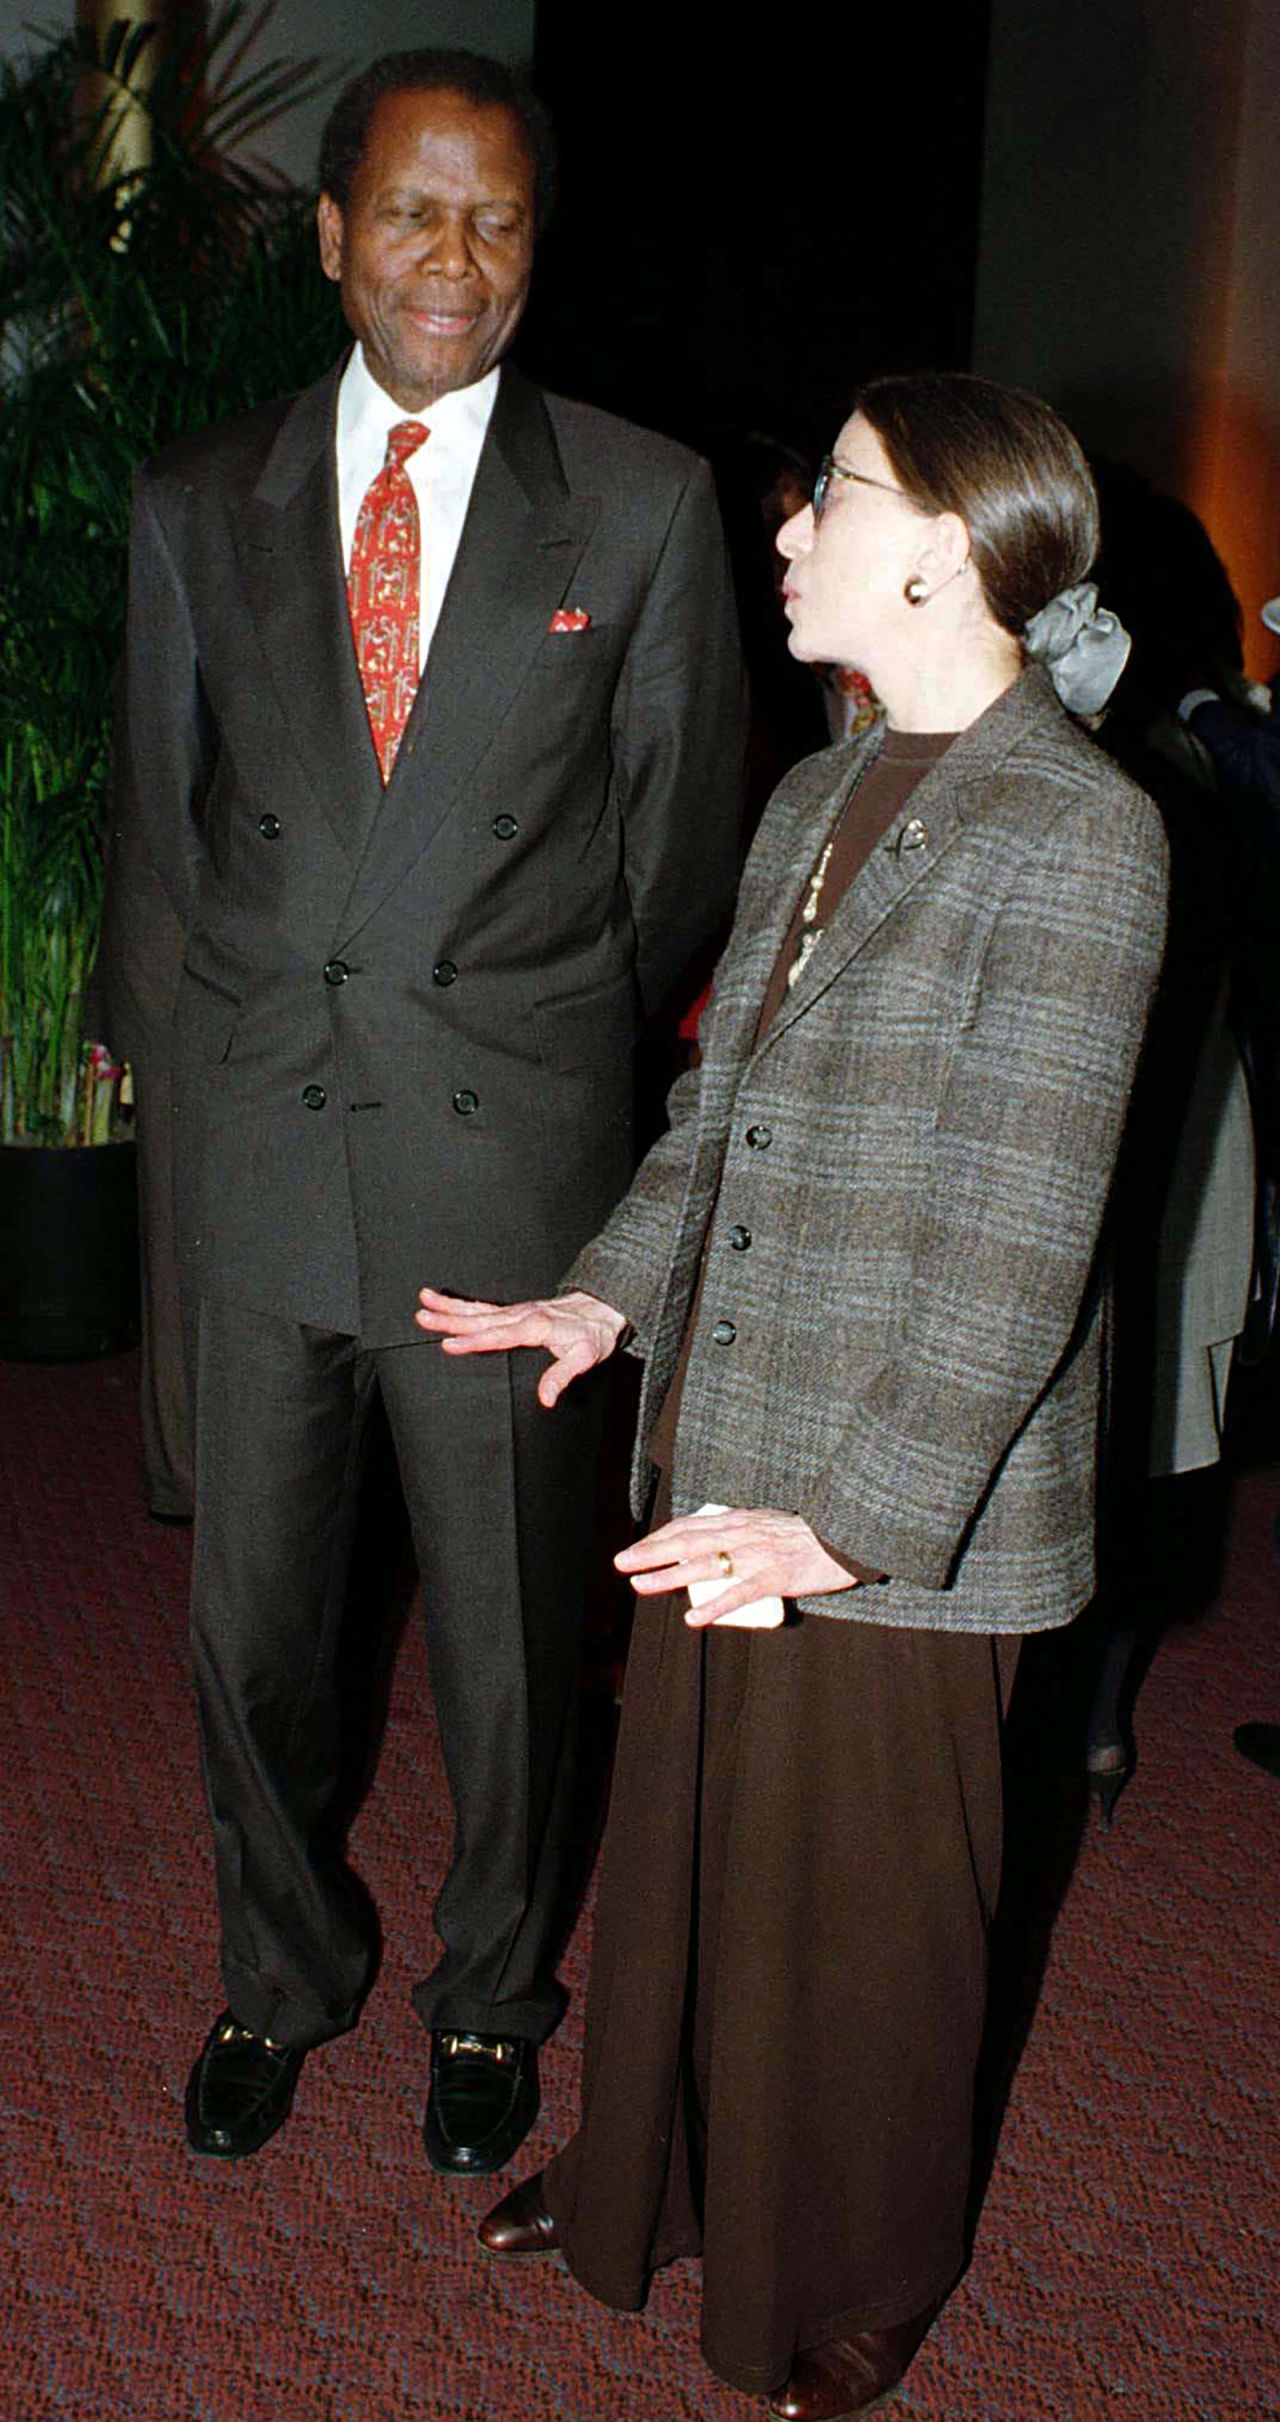 Poitier chats with Supreme Court Justice Ruth Bader Ginsburg before the premiere of the film "Mandela and de Klerk" in 1997.